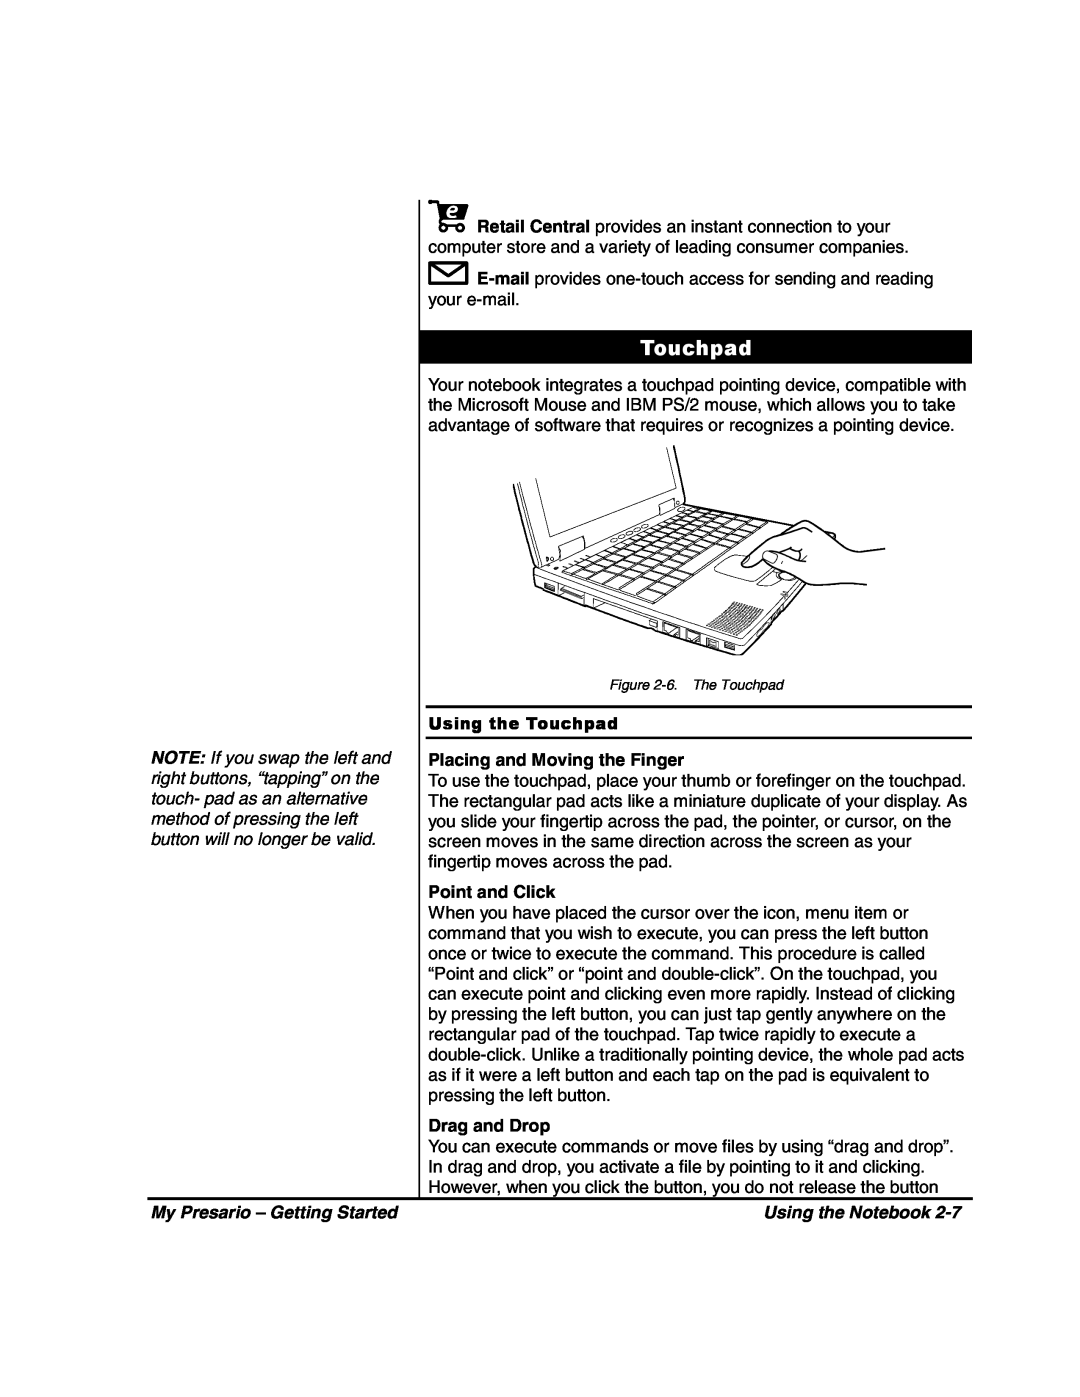 HP 80XL302 manual Using the Touchpad, Placing and Moving the Finger, Point and Click, Drag and Drop, Using the Notebook 